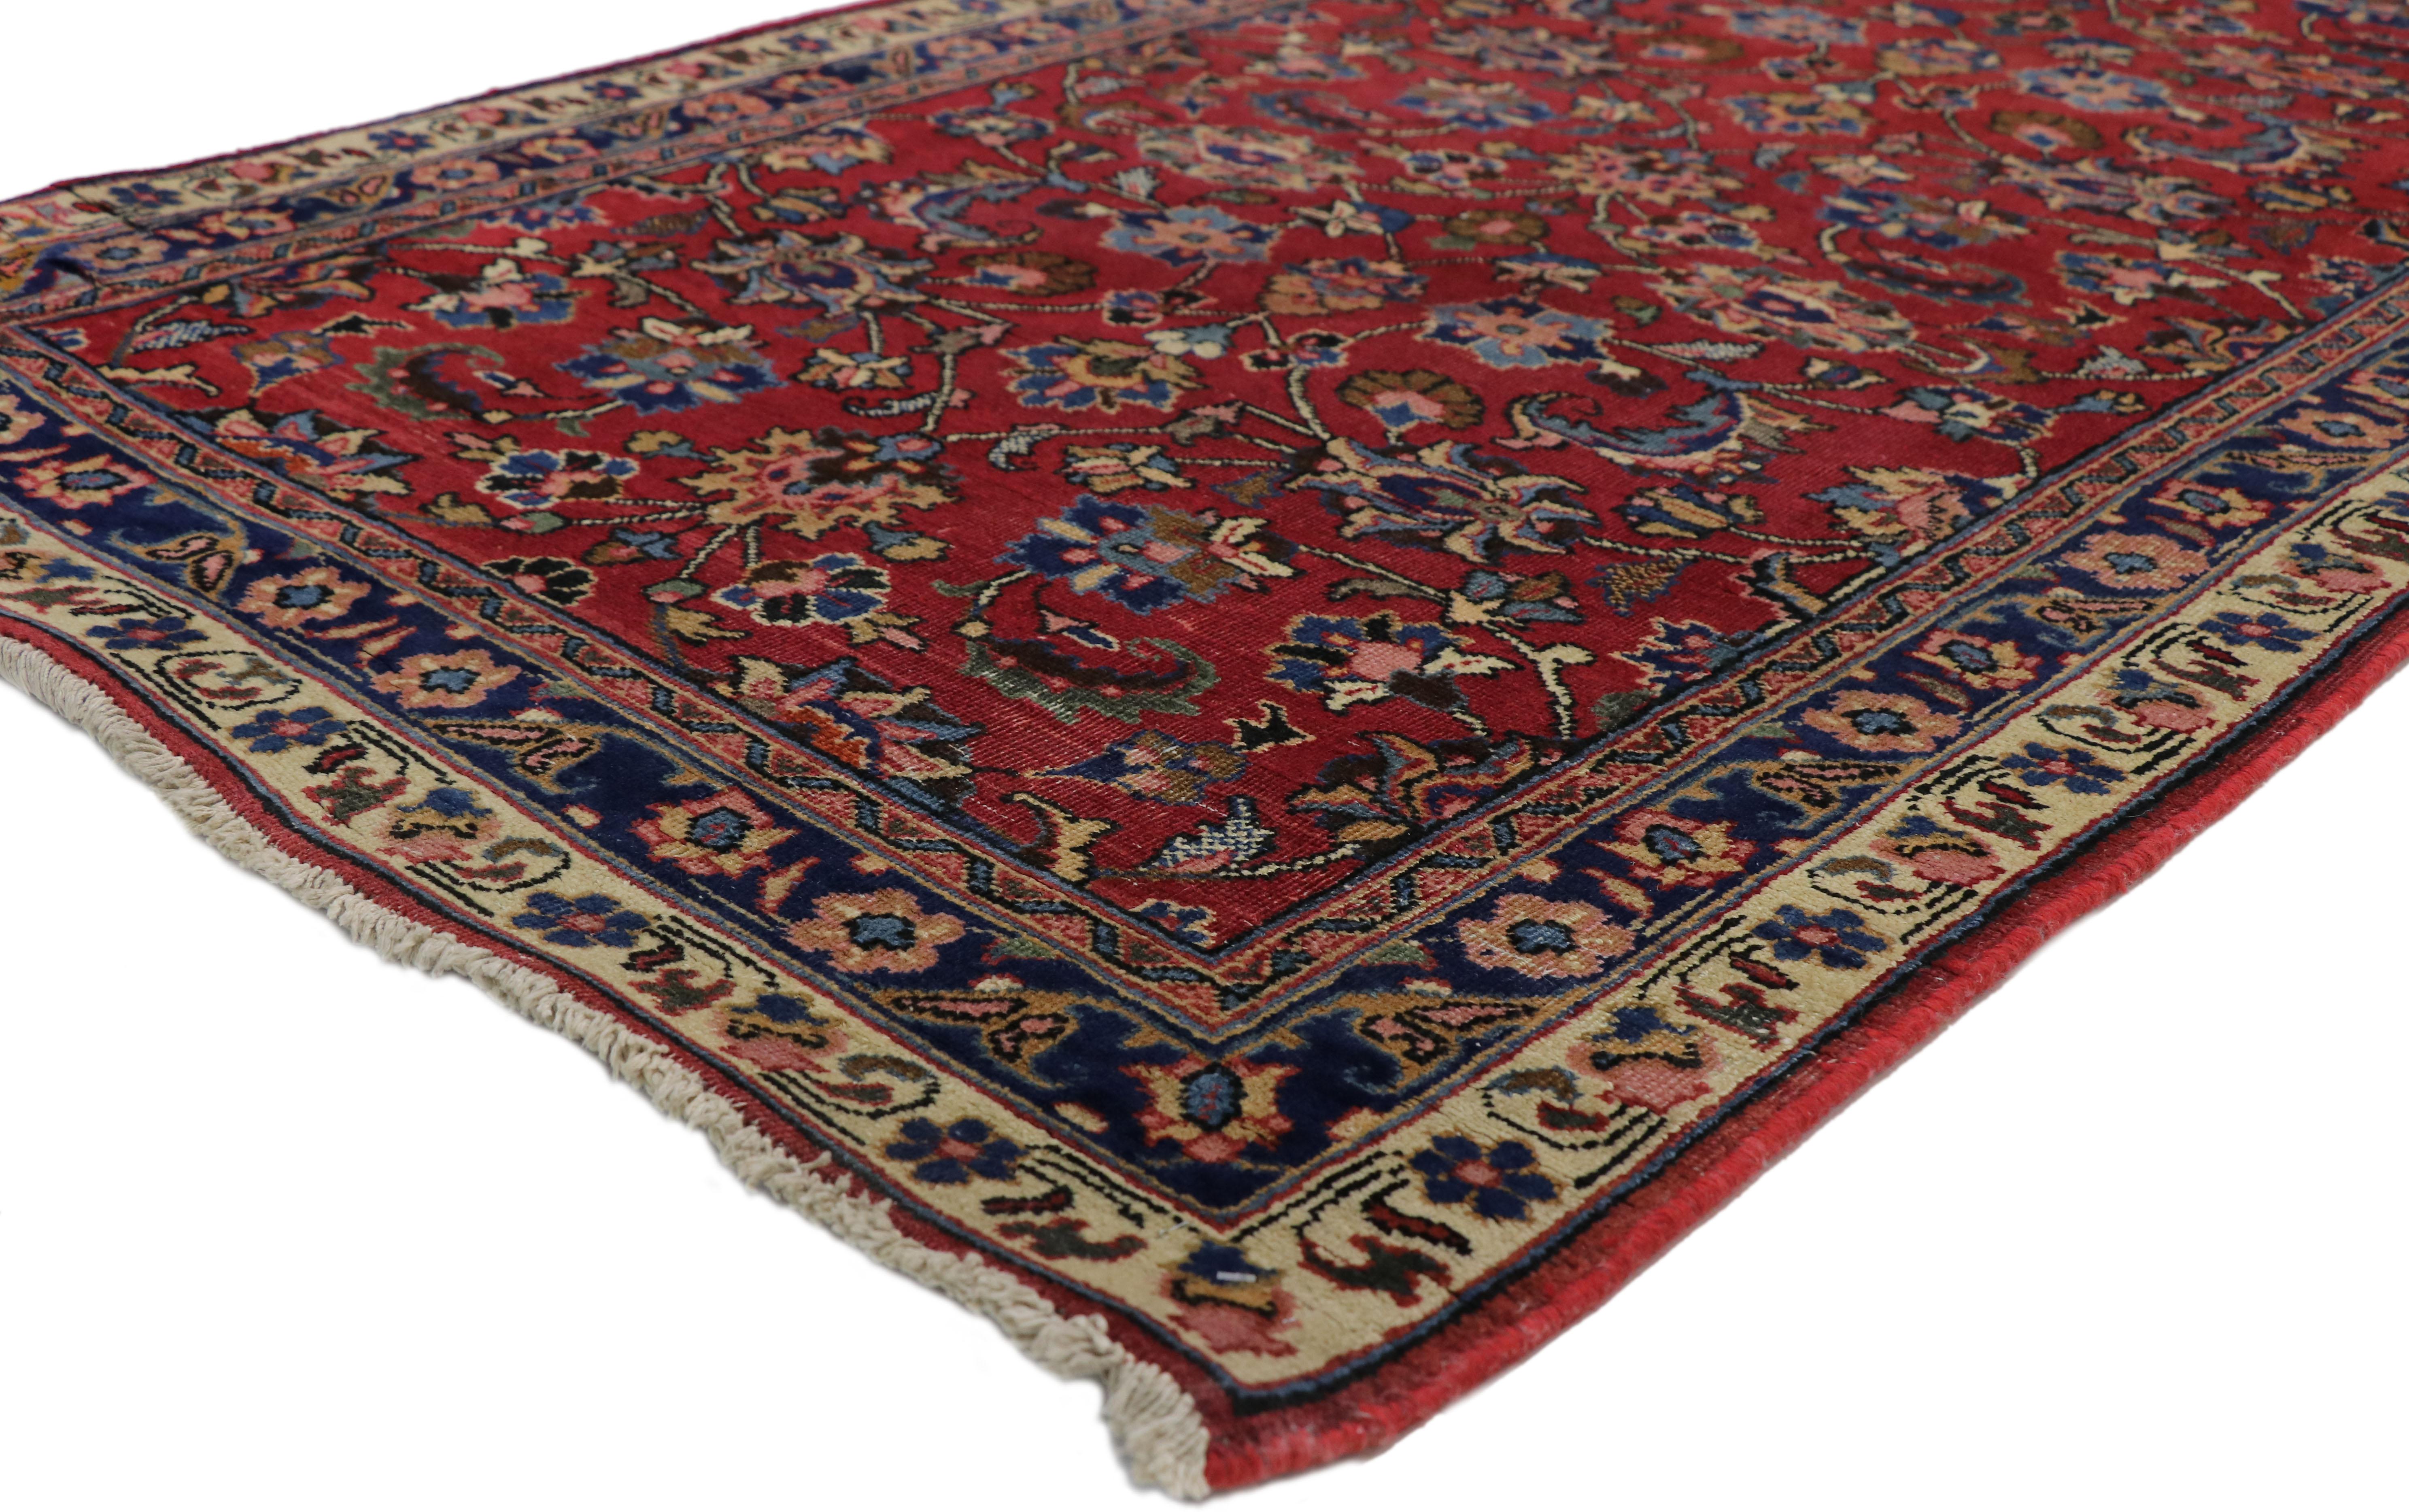 75353, vintage Persian Mashhad runner with Old World Parisian style. This hand knotted wool vintage Persian Mashhad runner features an all-over floral pattern composed of the Herati pattern spread across an abrashed field. The classic Herati